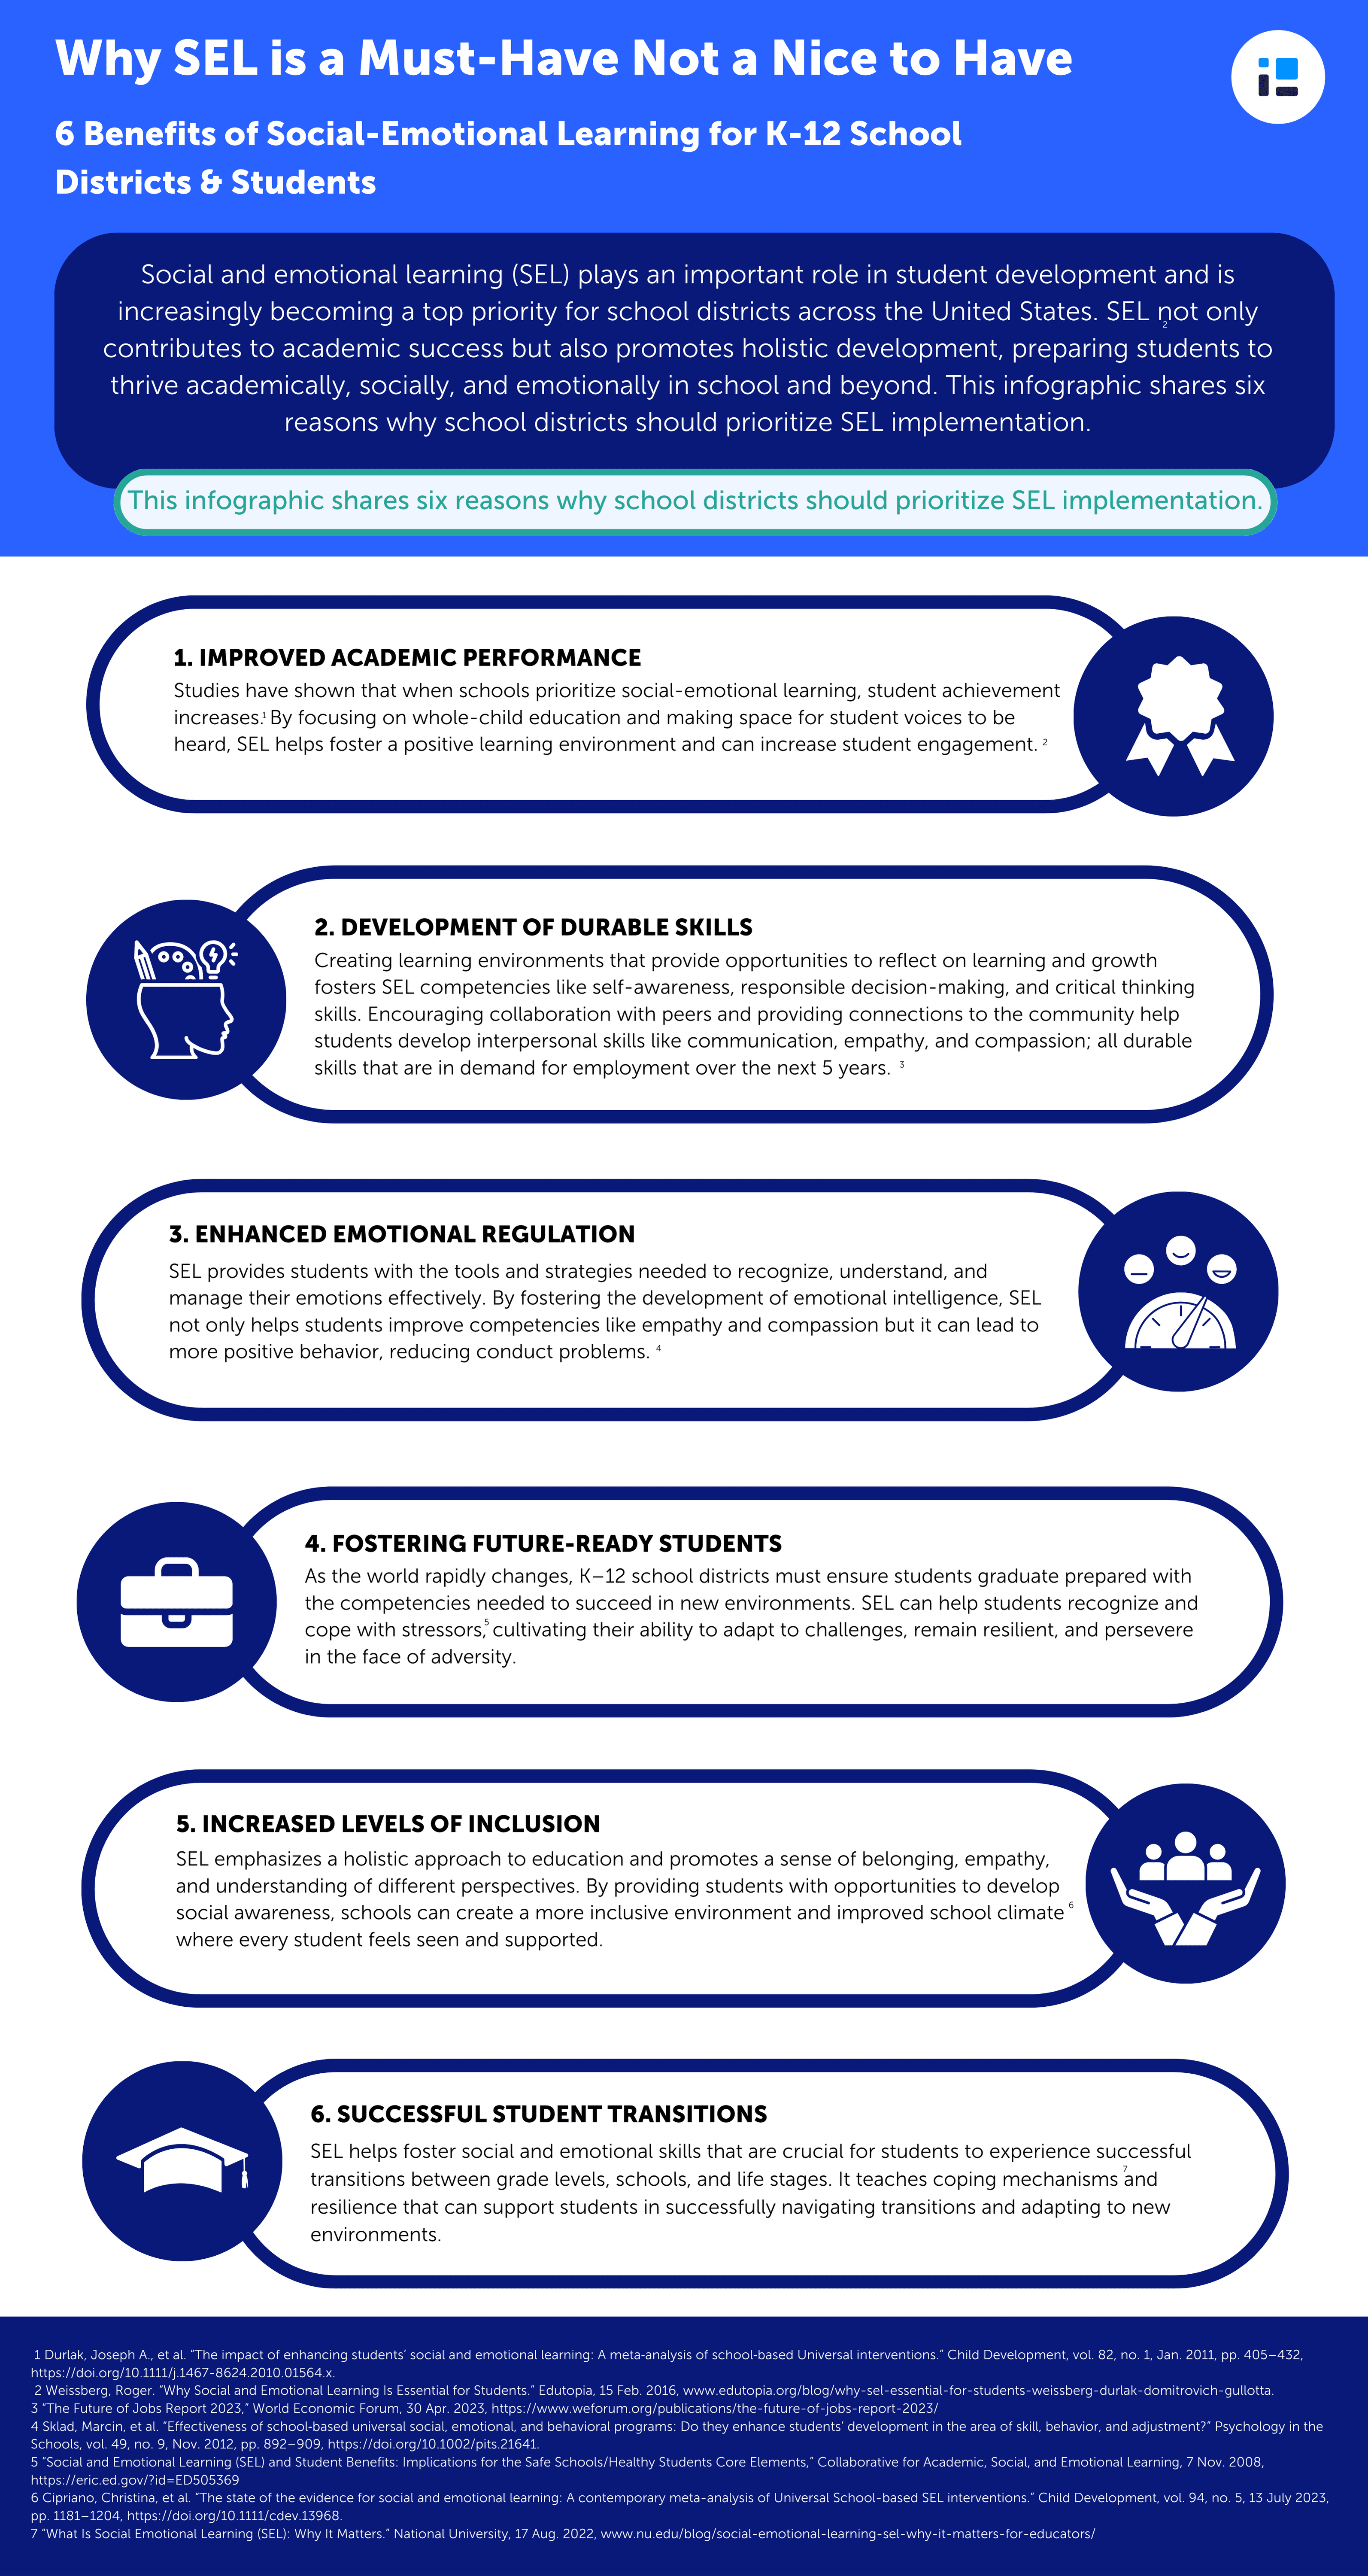 Image of the 6 benefits of SEL infographic